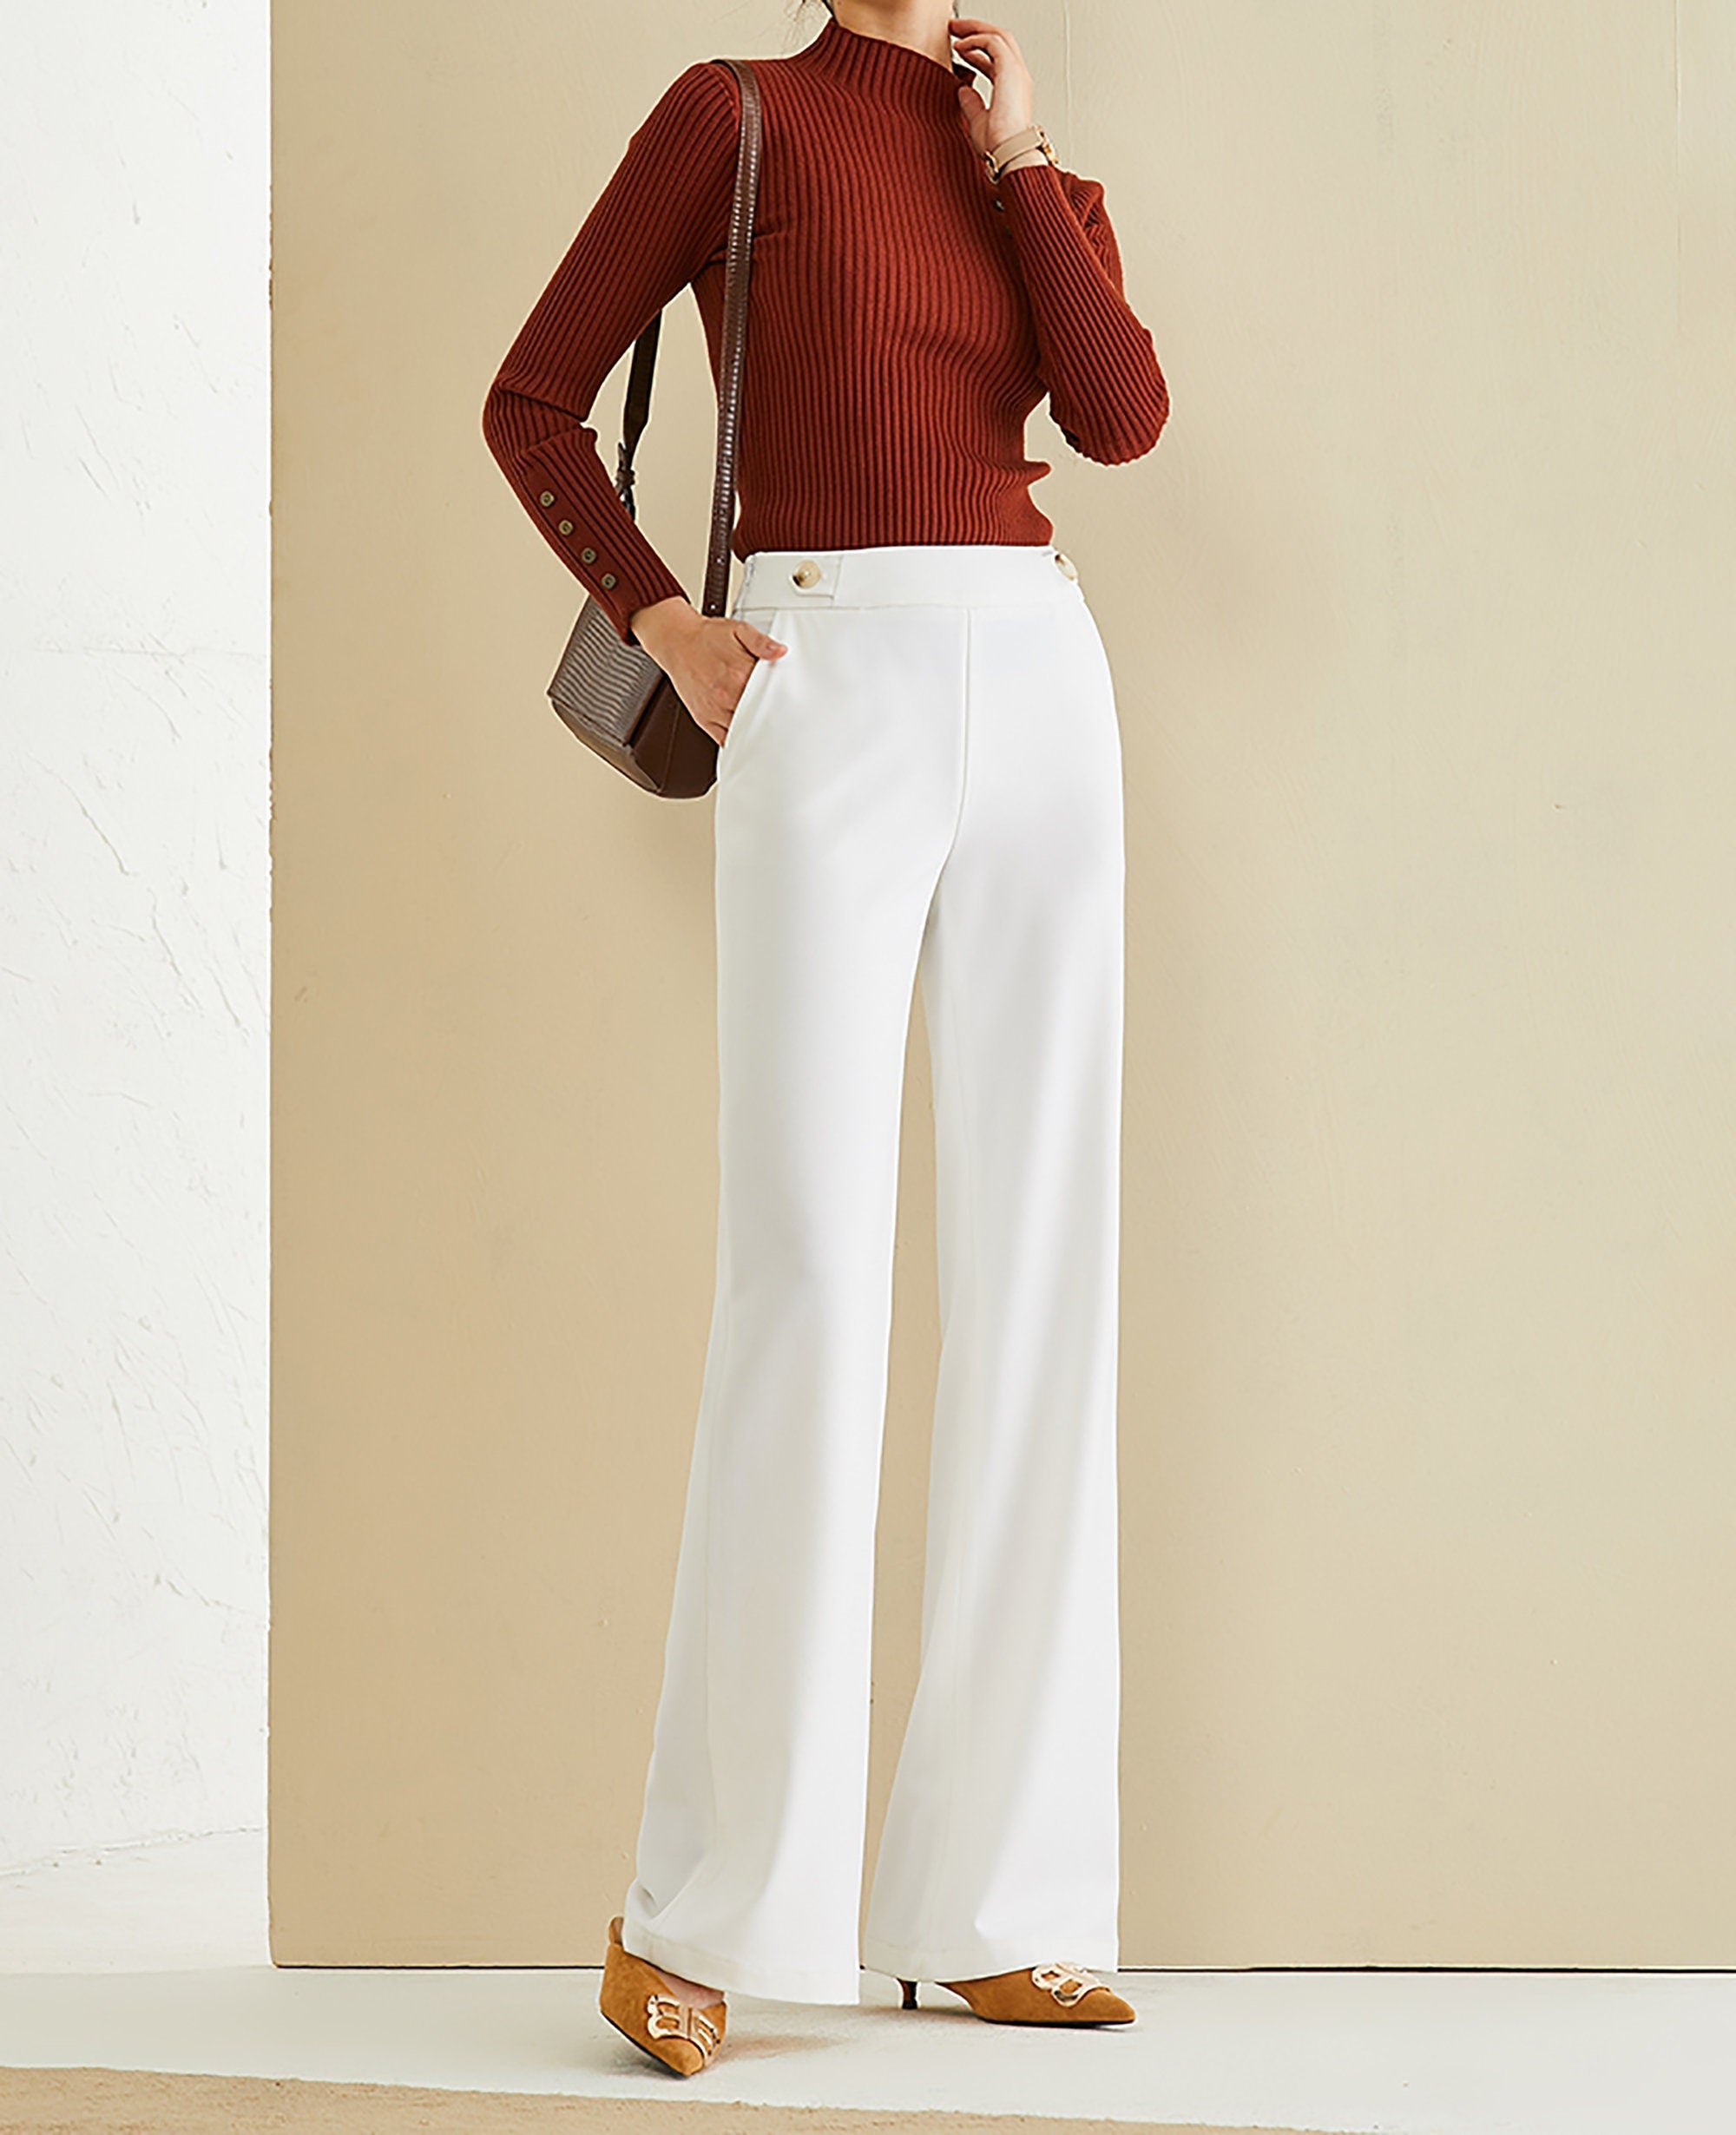  SDCVRE straight trousers Women's High Waist Floor-Length  Suits Pants Autumn Winter White Loose Wide Leg Pants Female Office Ladies  Straight Long Trousers White Long,S : Clothing, Shoes & Jewelry